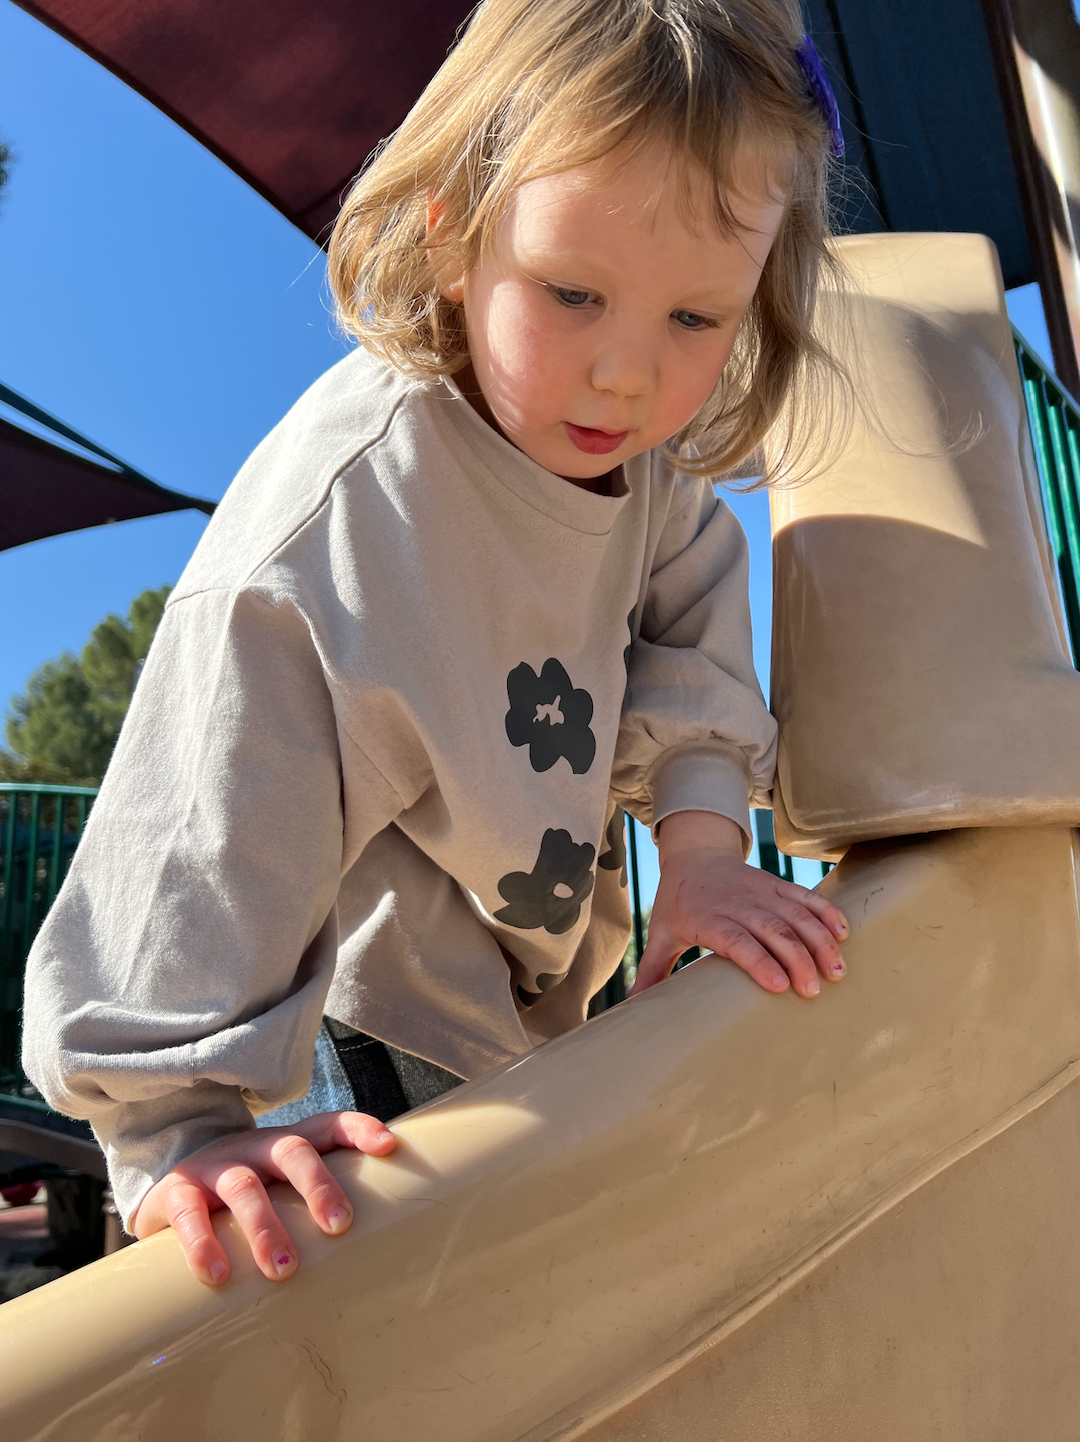 A child climbing on a jungle gym wearing a kids' tee shirt in soft gray with dark gray flowers, sleeves gathered at the cuffs